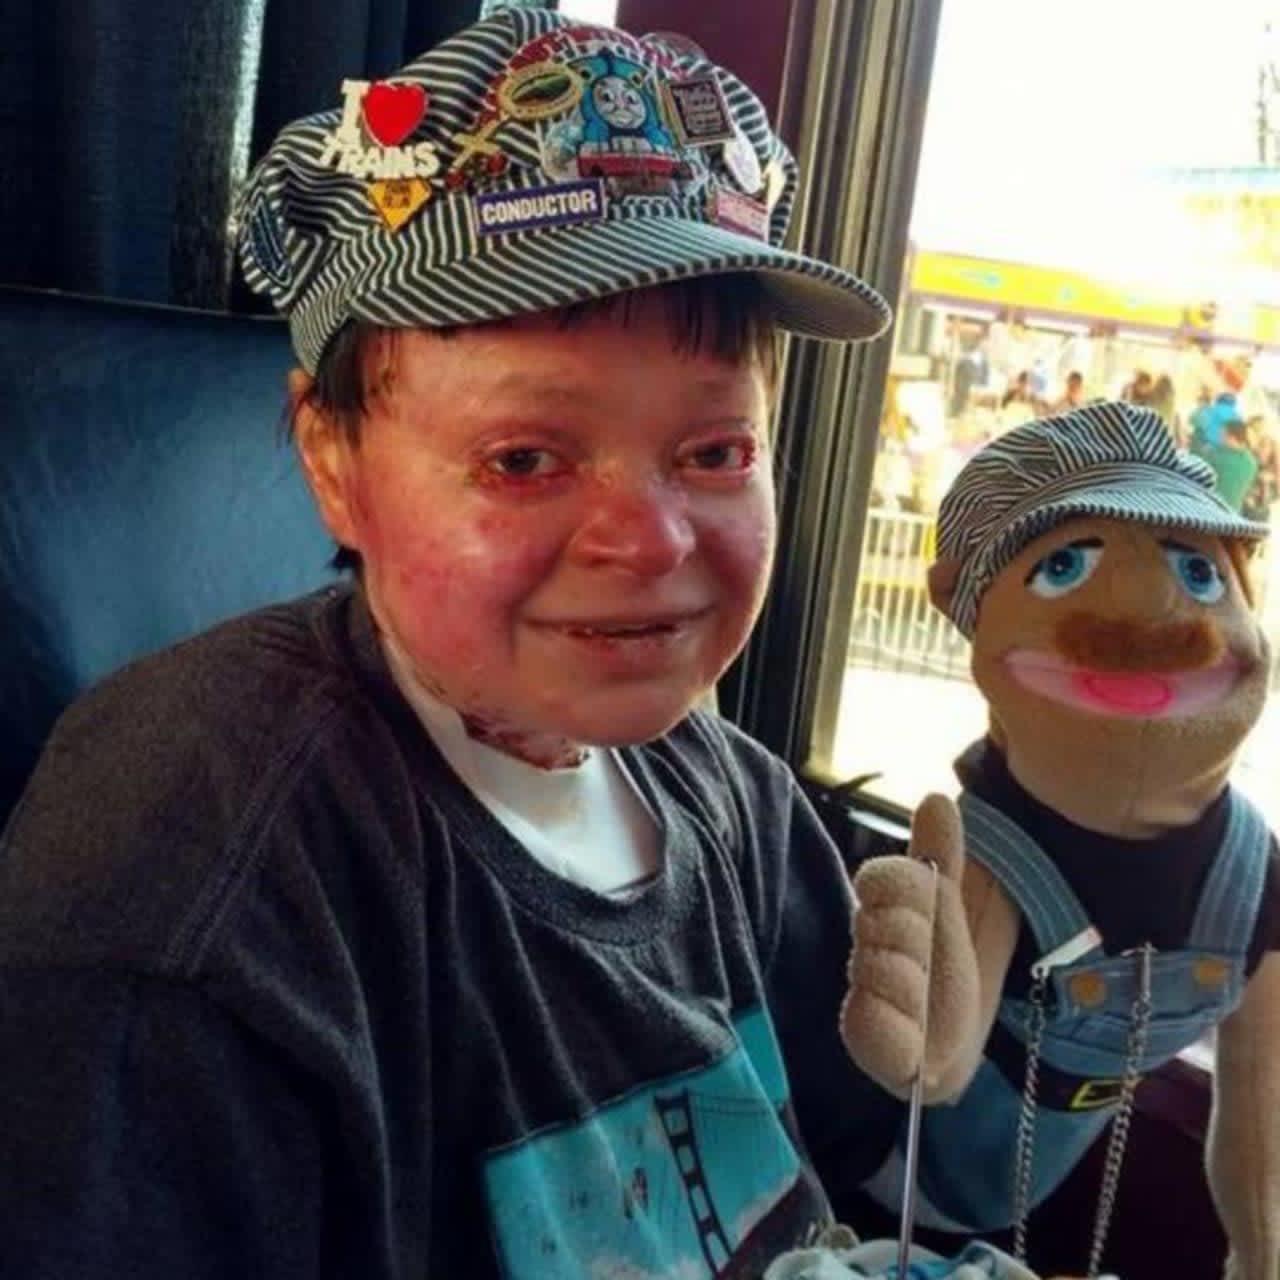 A Connecticut man who spread humor and joy despite suffering from a rare skin disorder has died.